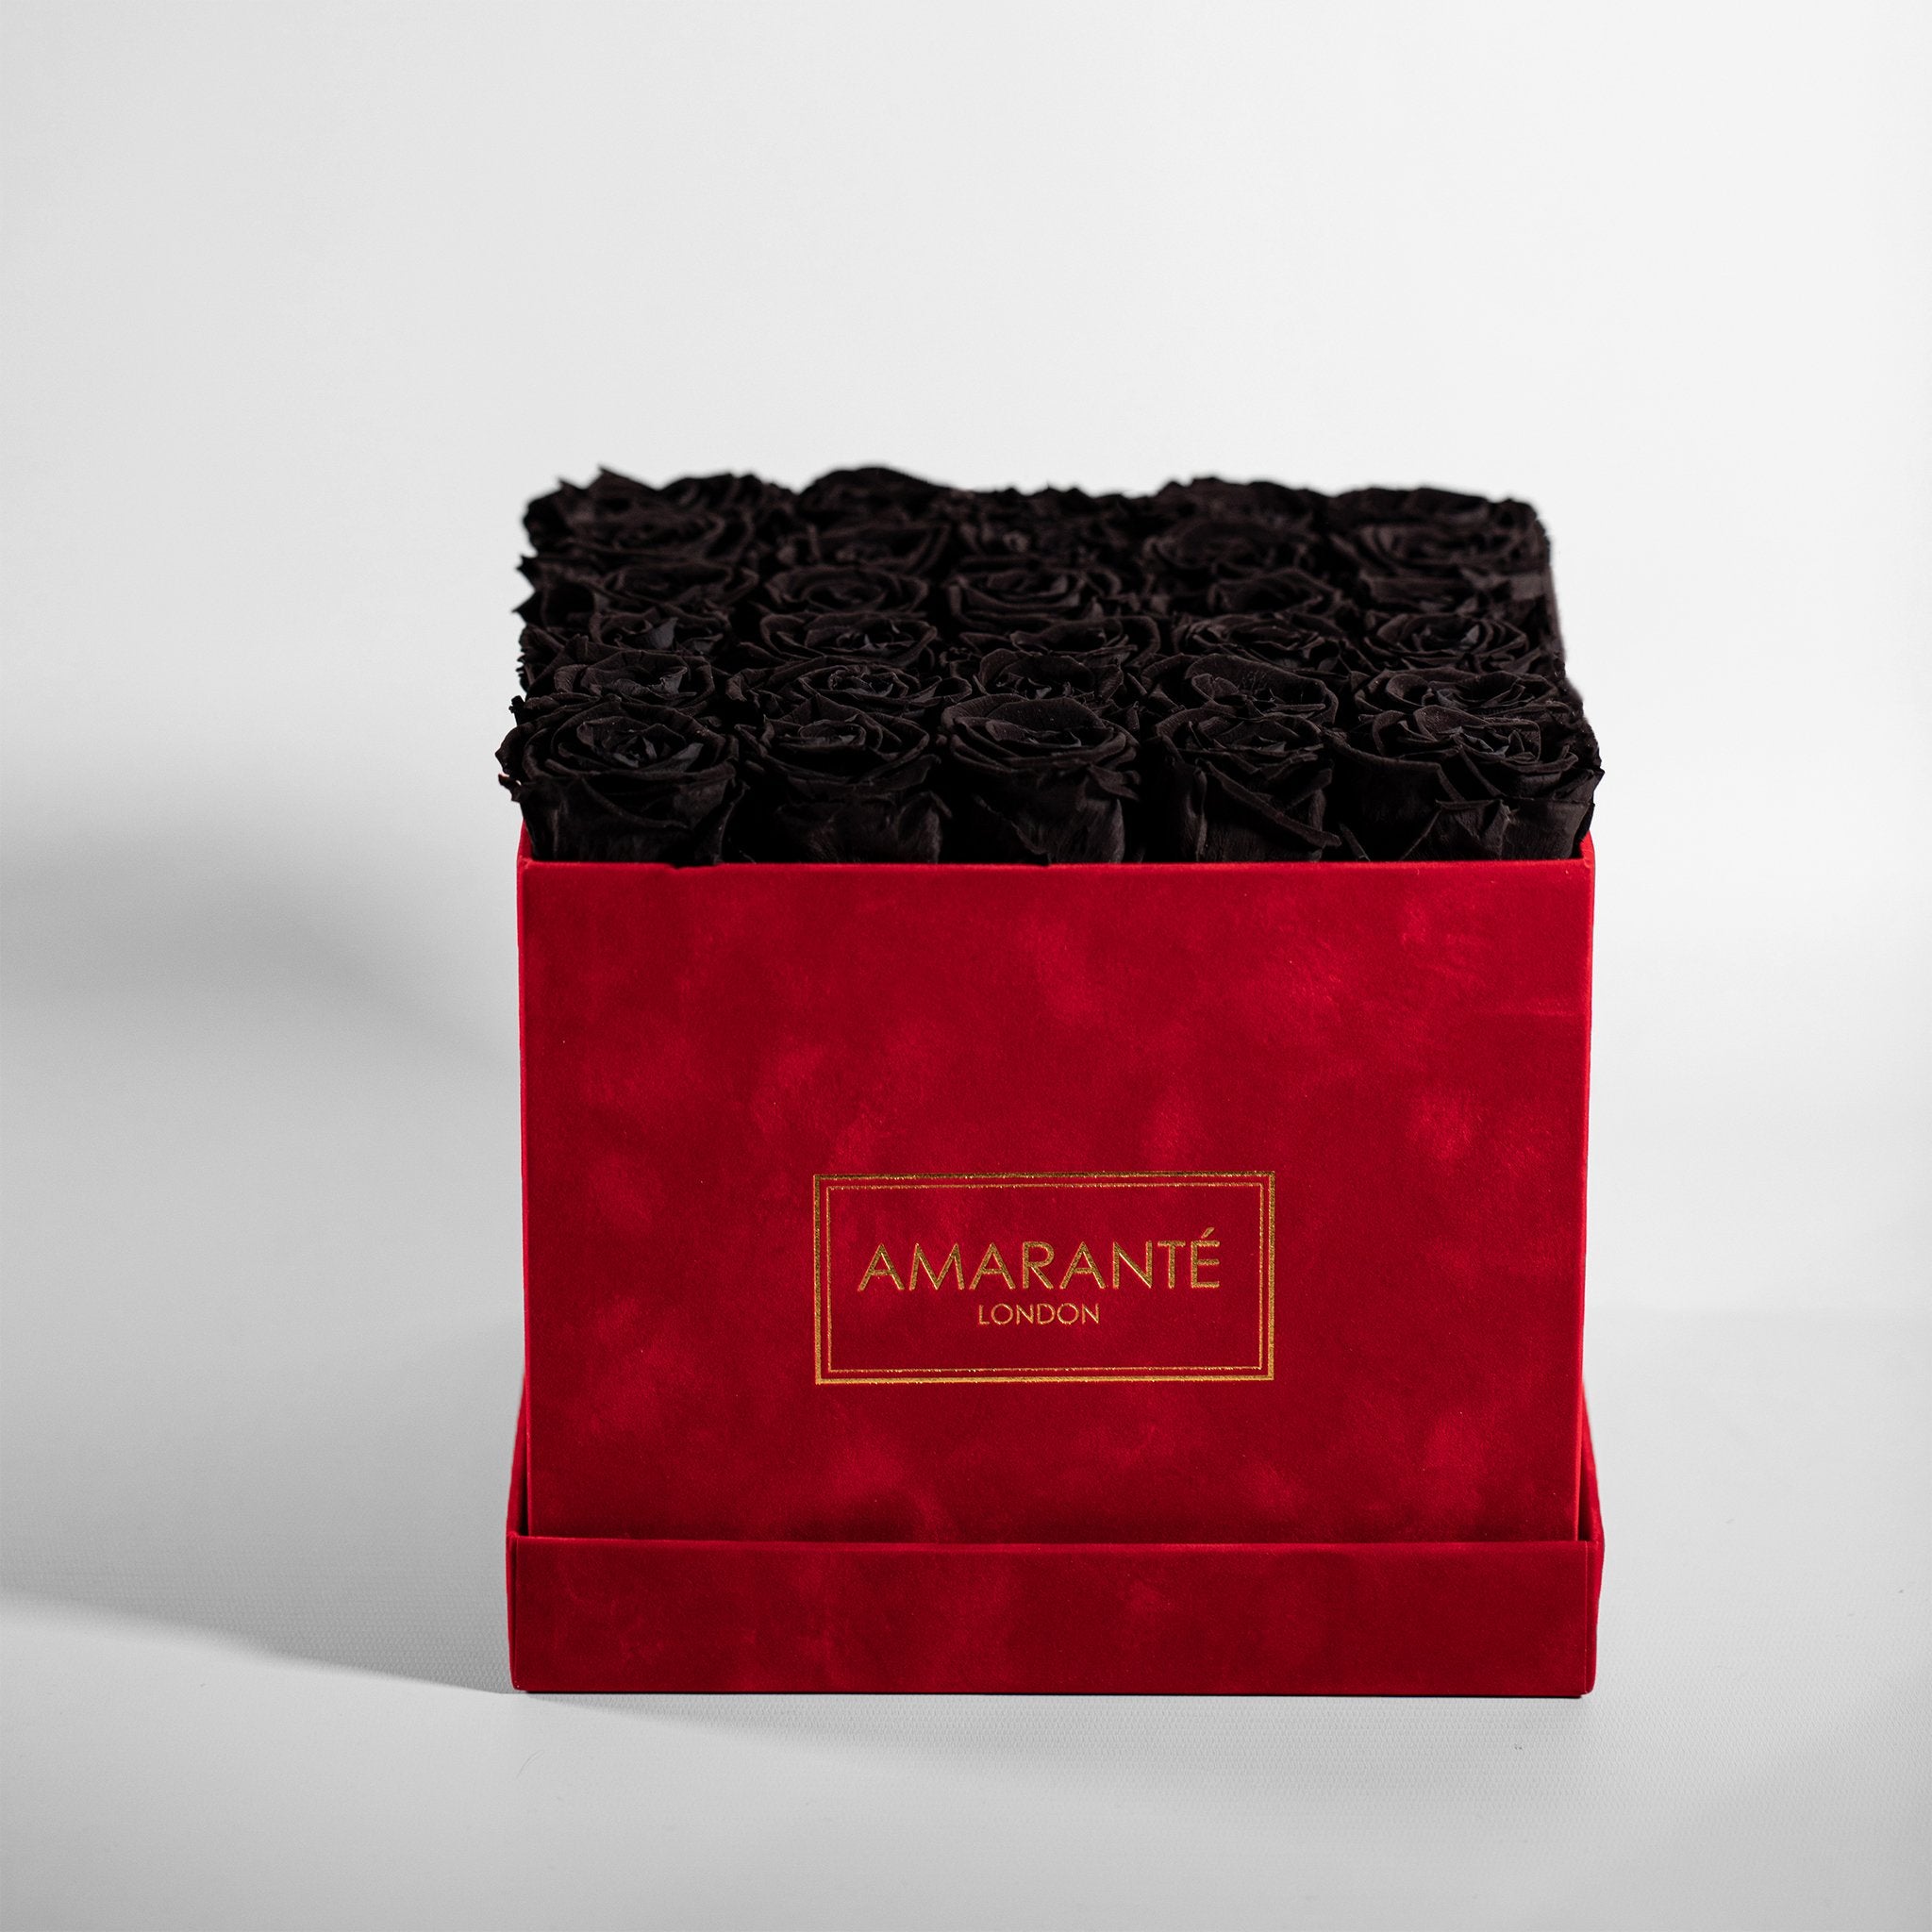 Botanical black Roses photographed in a stunning red large box 